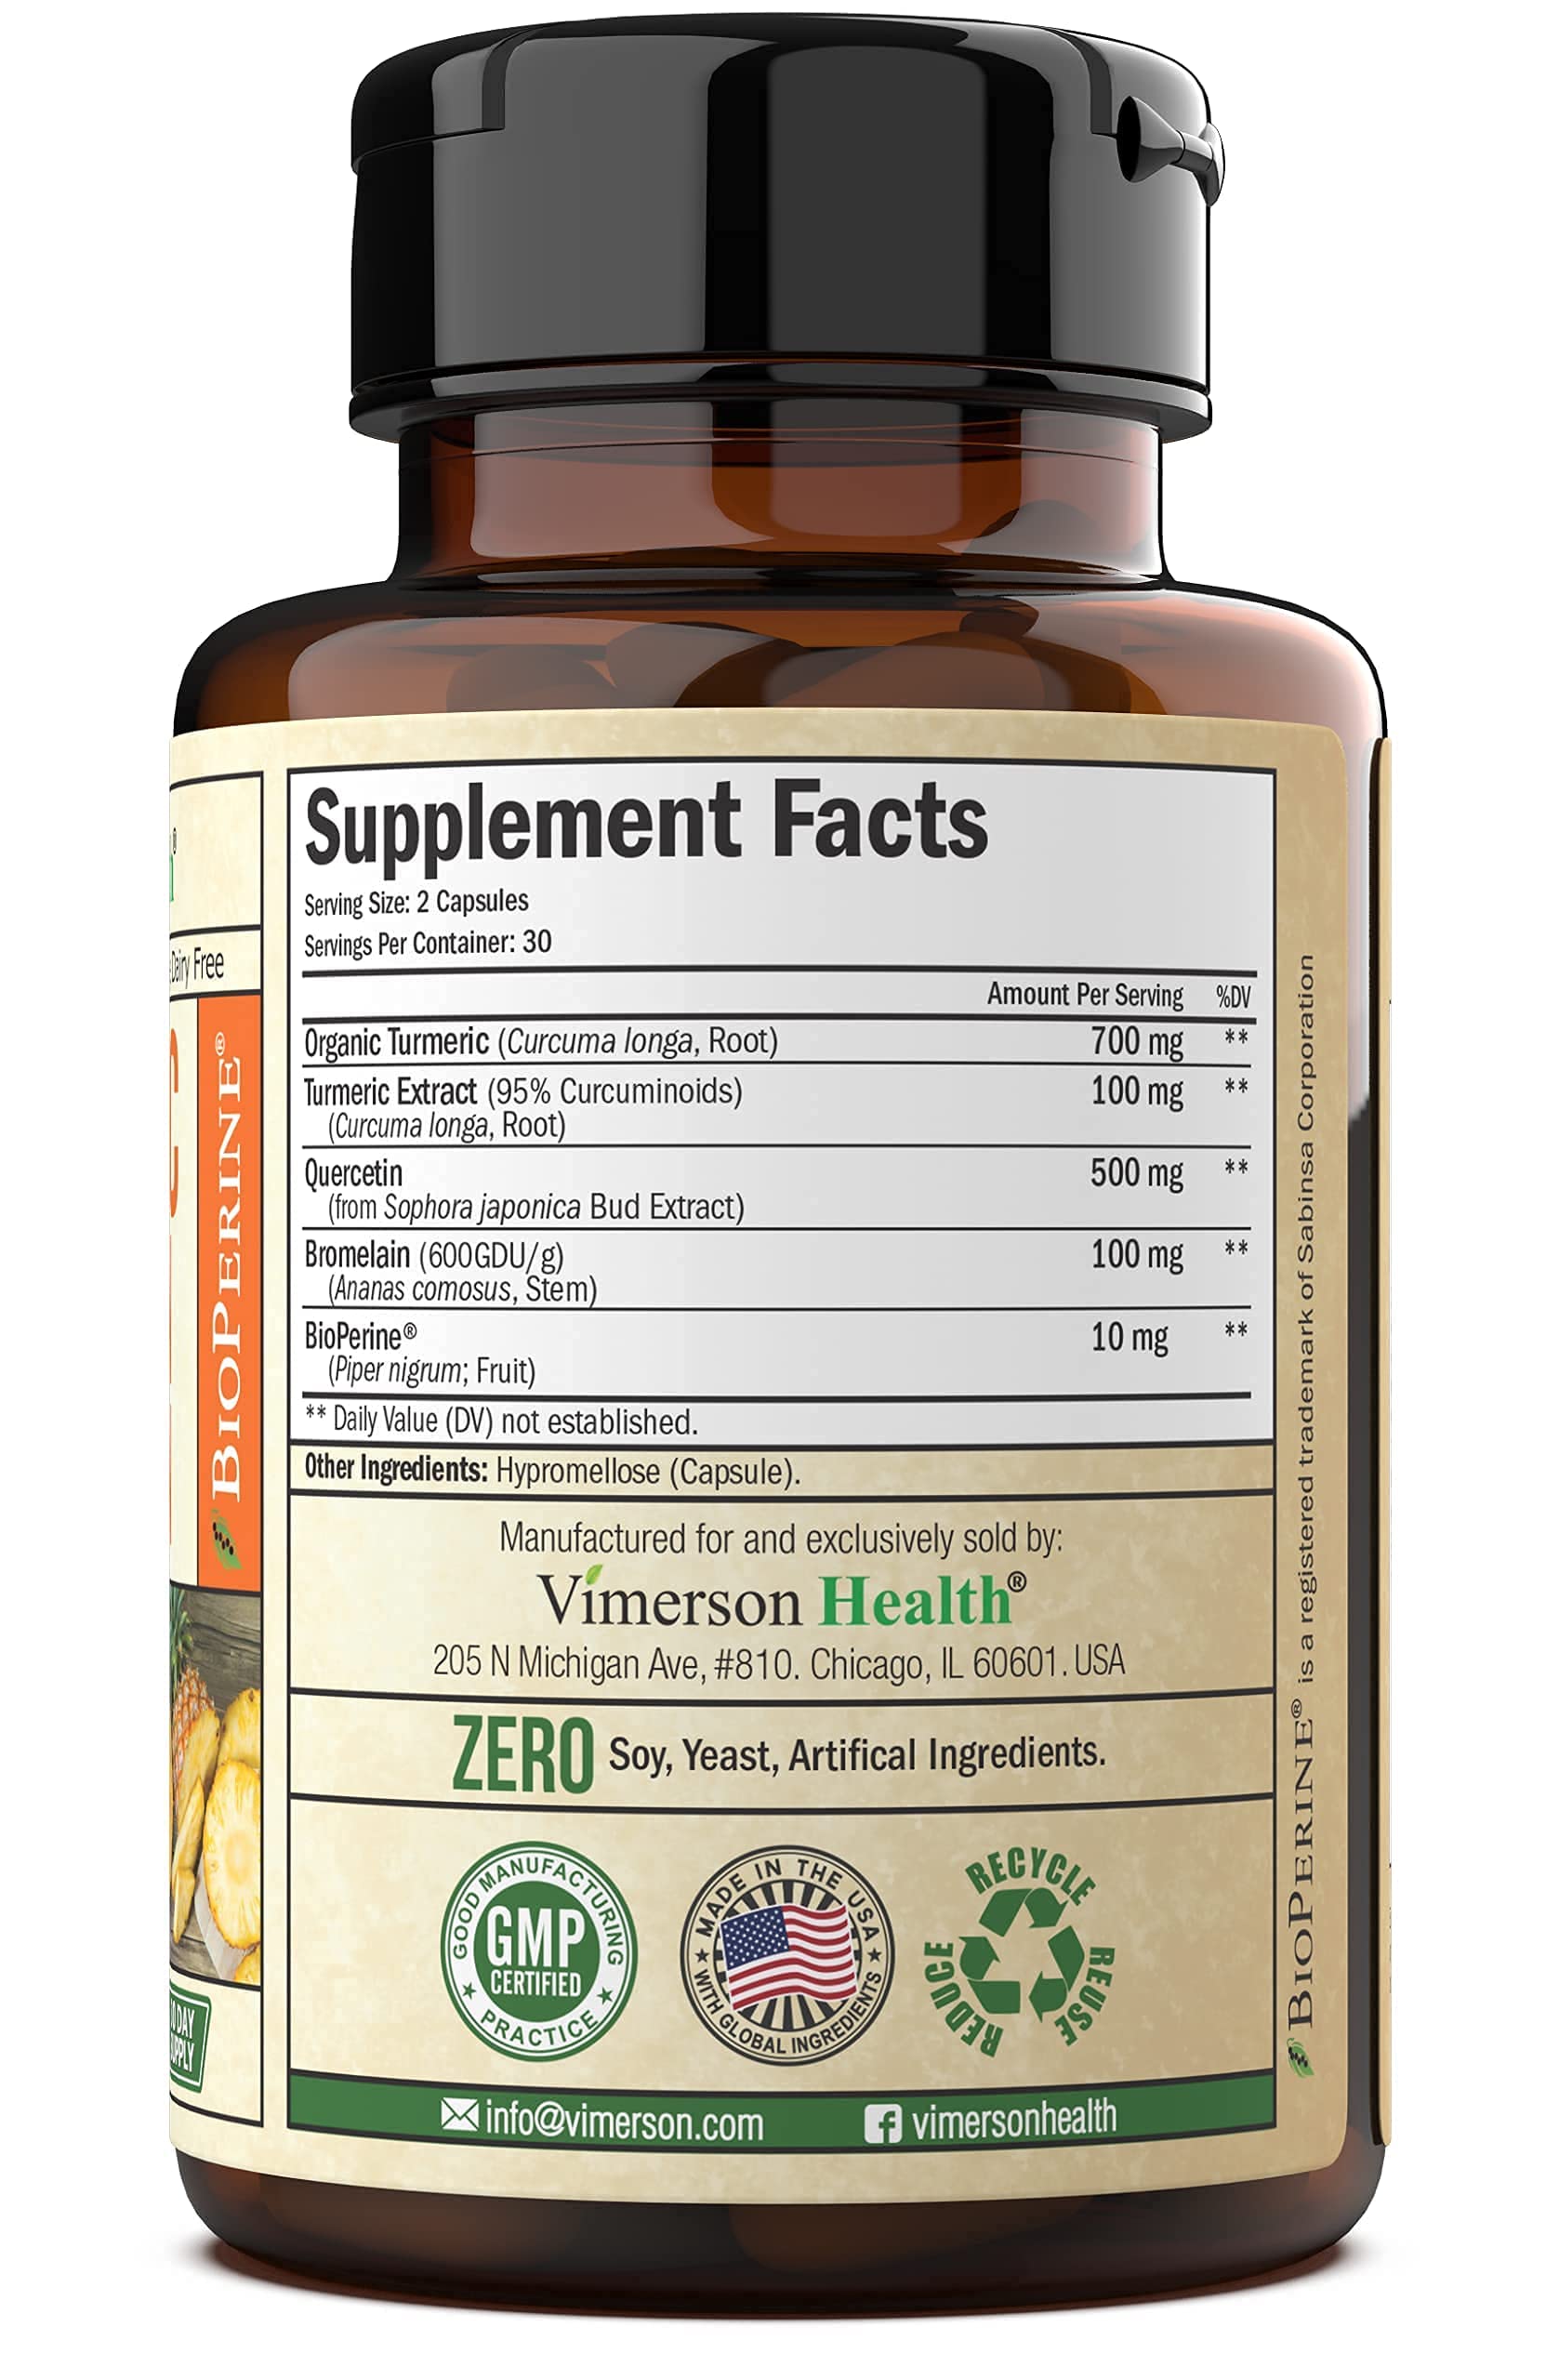 Vimerson Health Men's Multivitamin + Turmeric Bromelain Quercetin Bundle. Supports Healthy Immune Response, Helps with Energy & Performance, Muscle and Joint Health, Antioxidant Properties